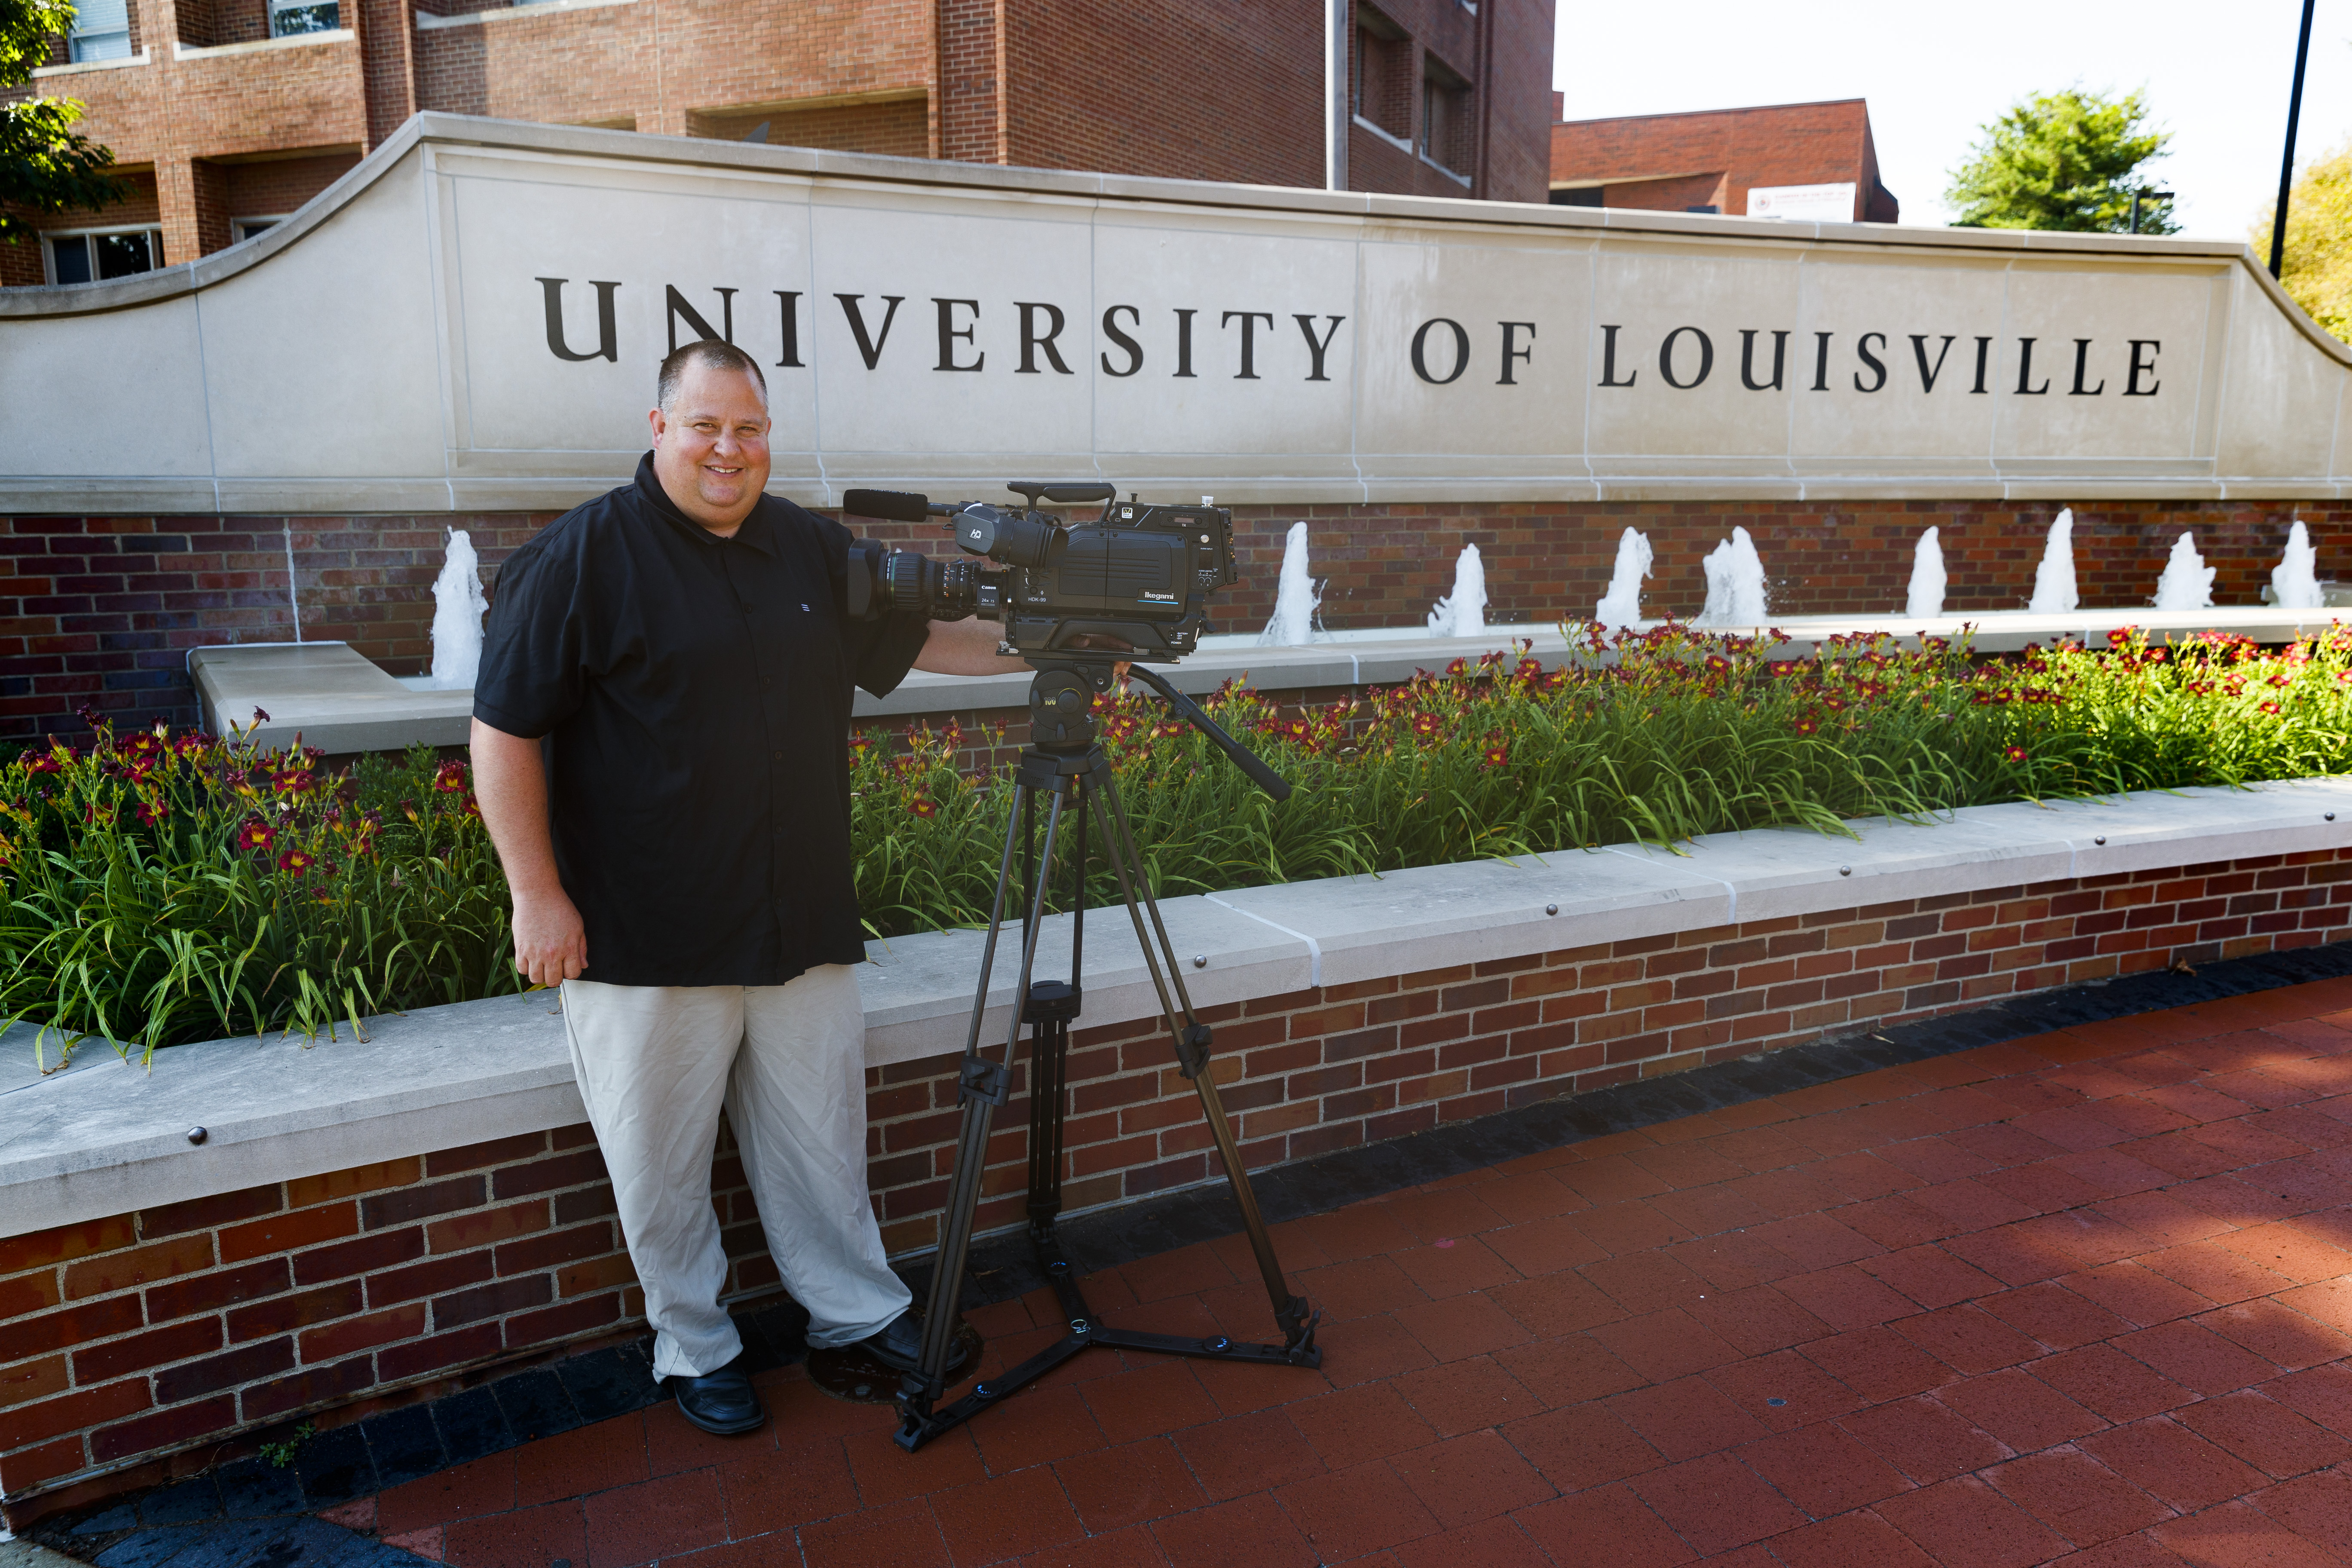 Ikegami Provides 10 Portable Cameras With 4K Capability for the University of Louisville